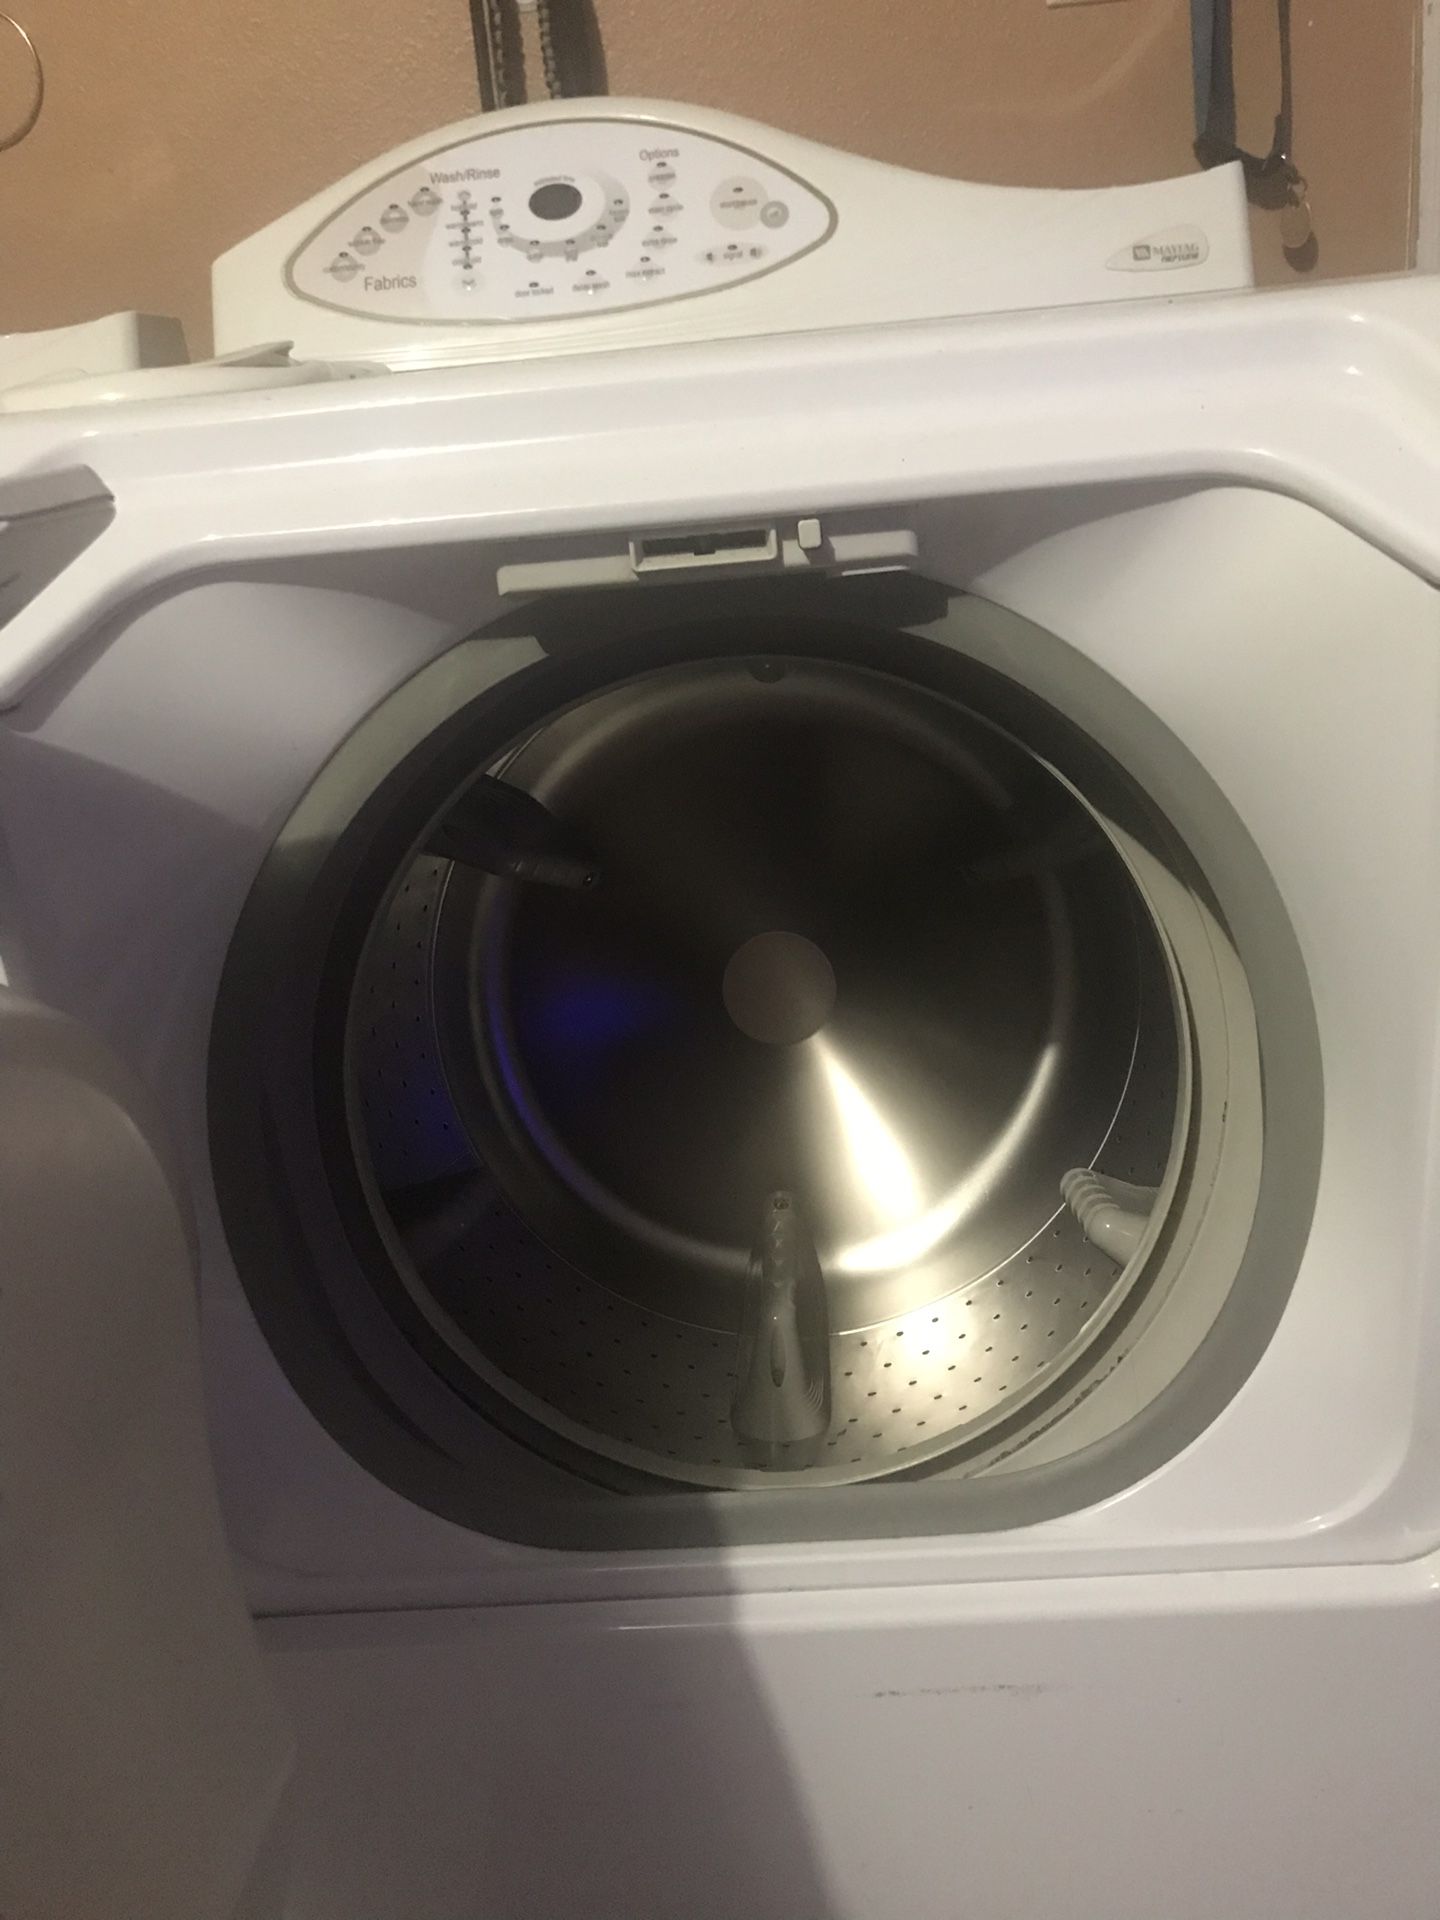 Maytag Neptune washer and dryer for Sale in Dade City, FL - OfferUp